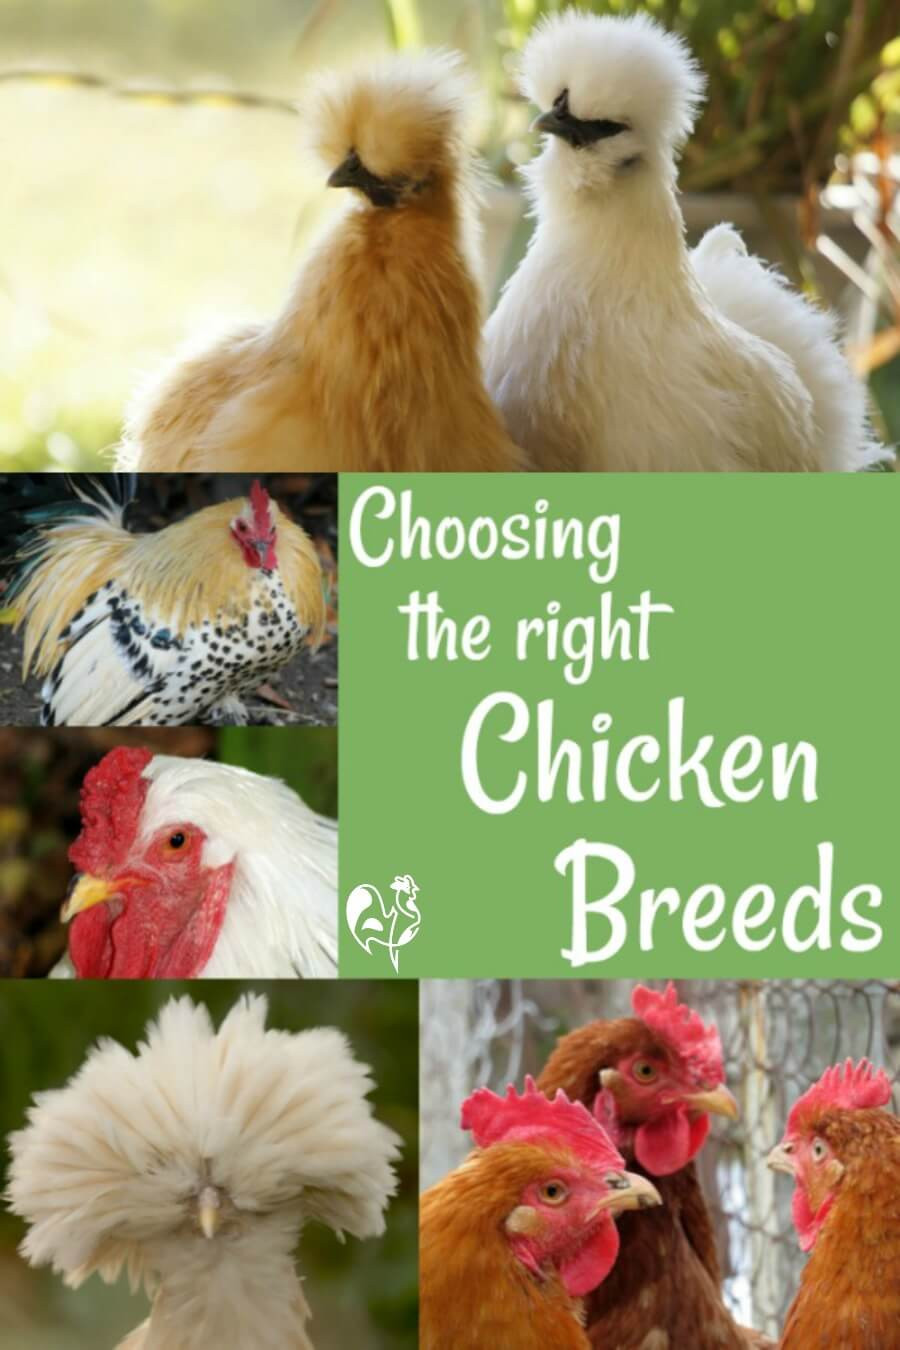 Backyard Chickens Breeds
 Backyard chicken breeds with pictures